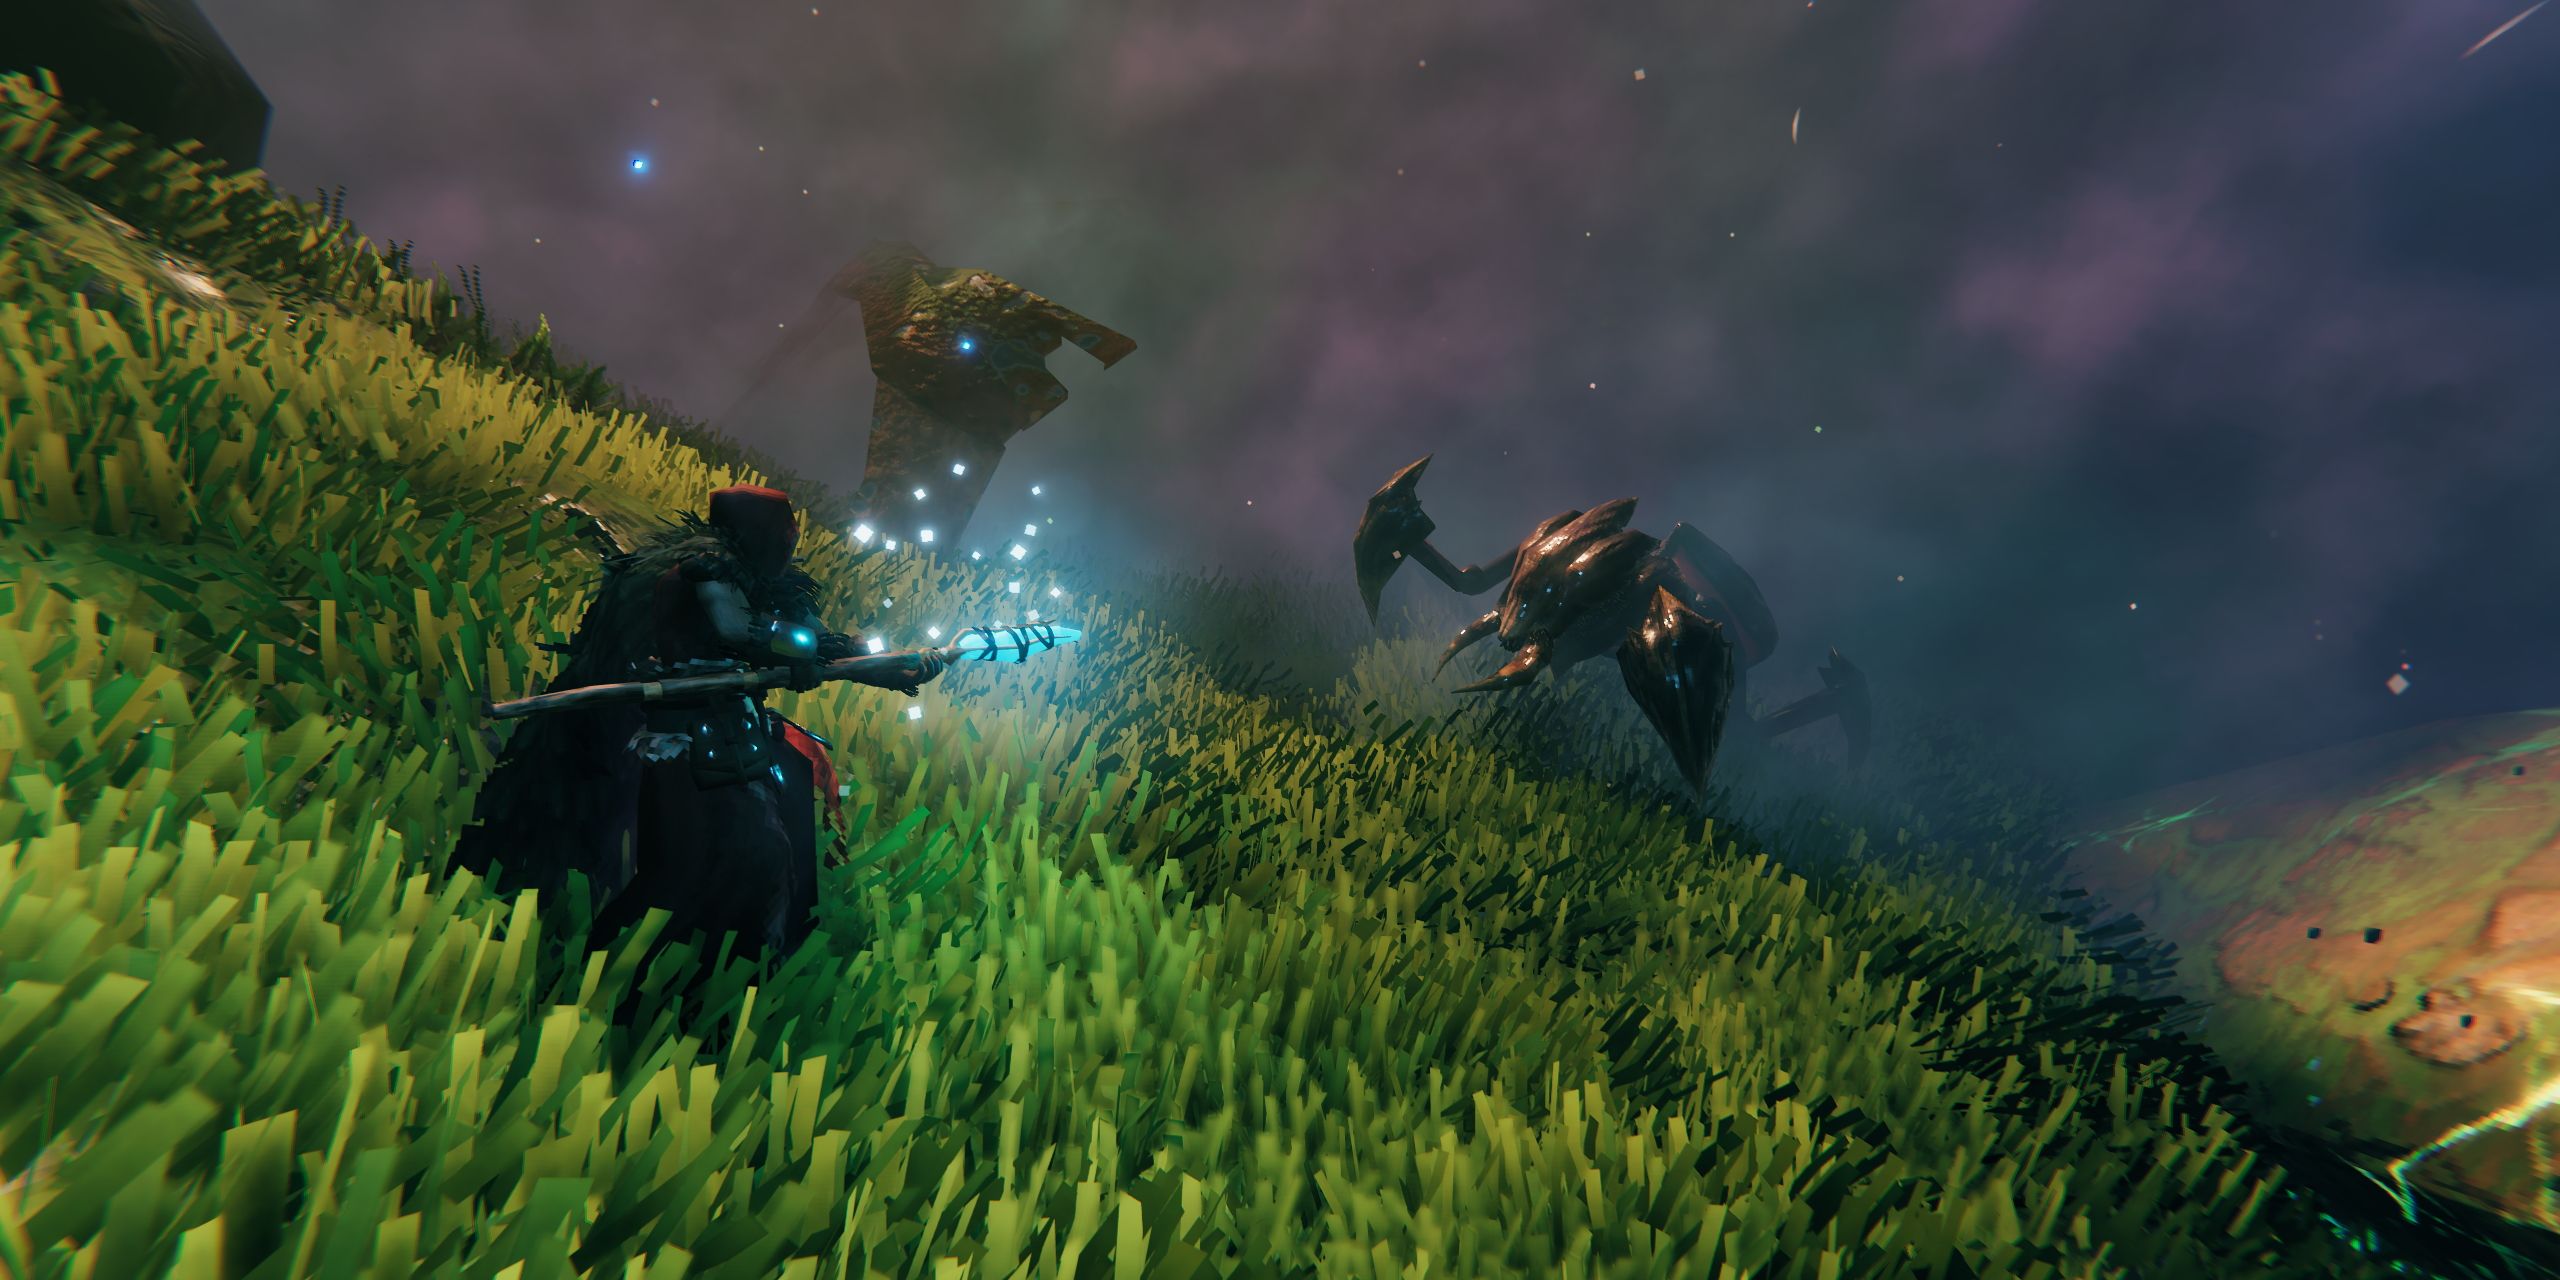 A character in the Mistylands of Valheim fights two bug-type enemies.